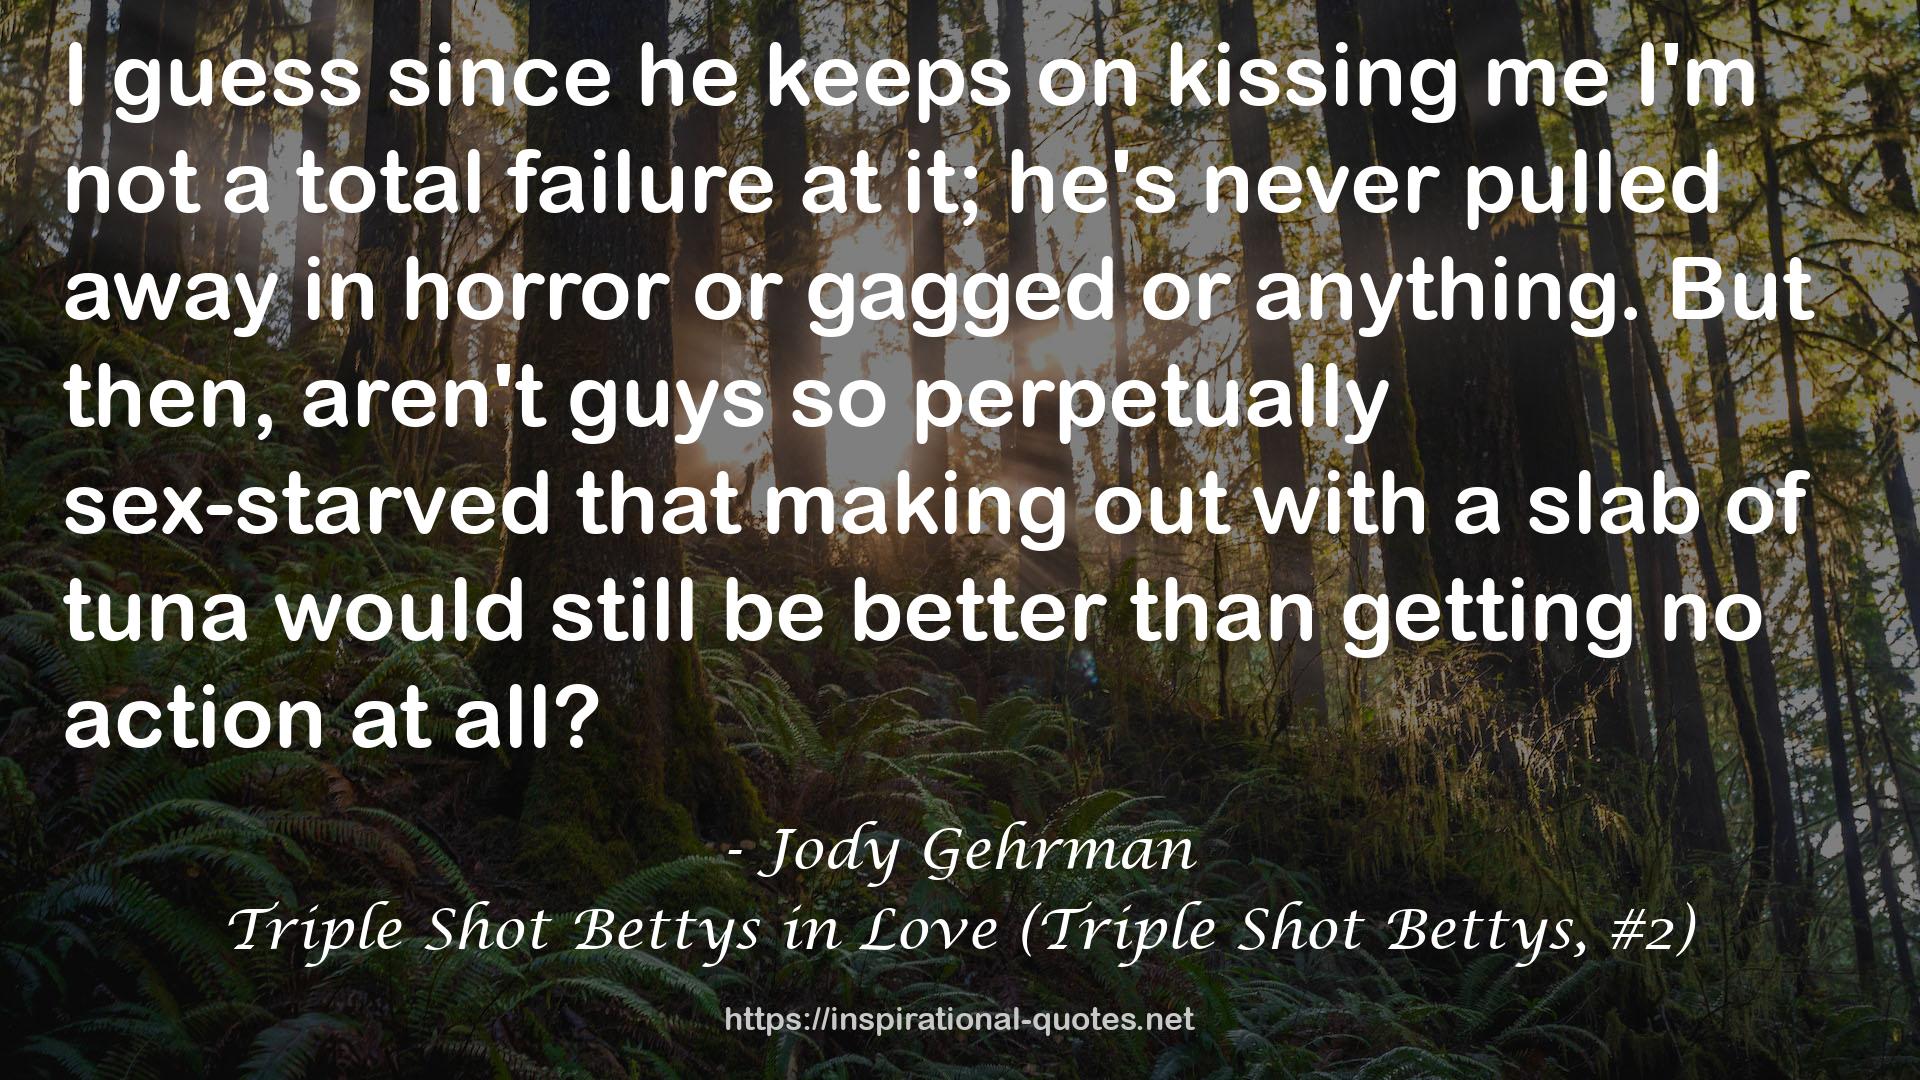 Triple Shot Bettys in Love (Triple Shot Bettys, #2) QUOTES